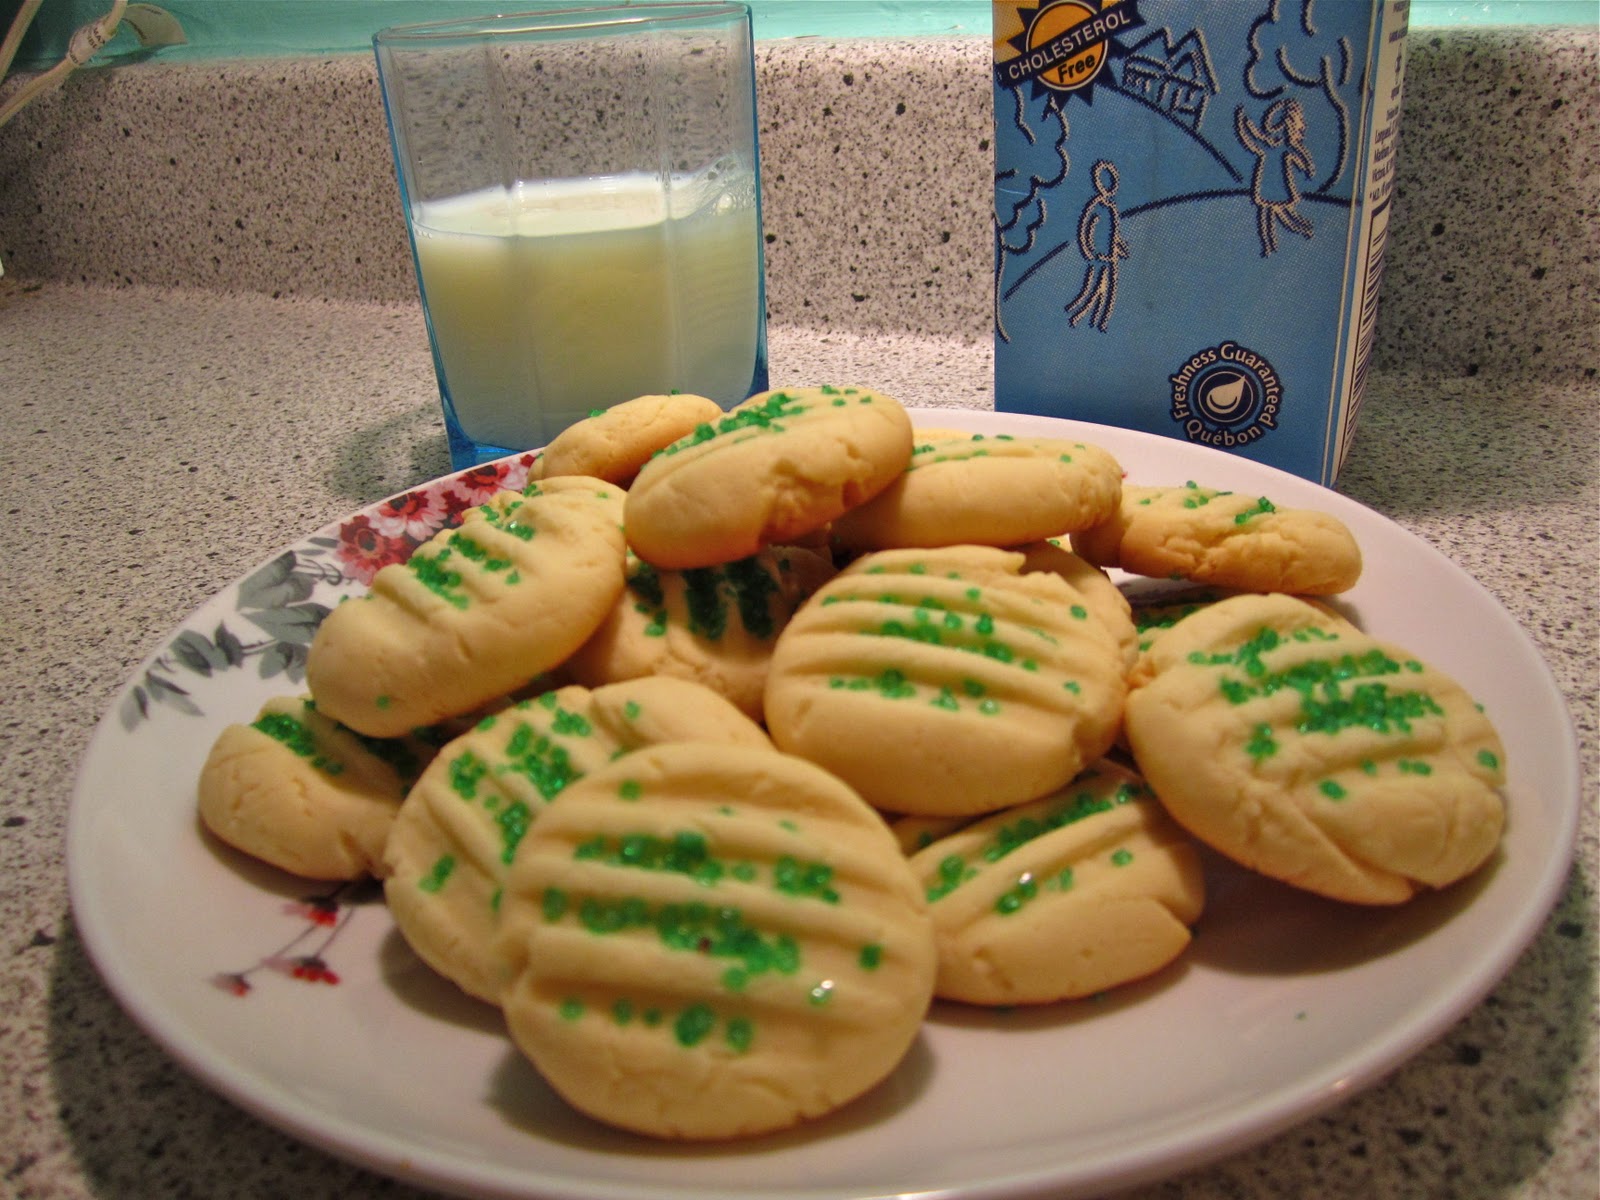 Breakfast, Lunch, and Dinner at Tiffany's: 4 Ingredient Shortbread Cookies